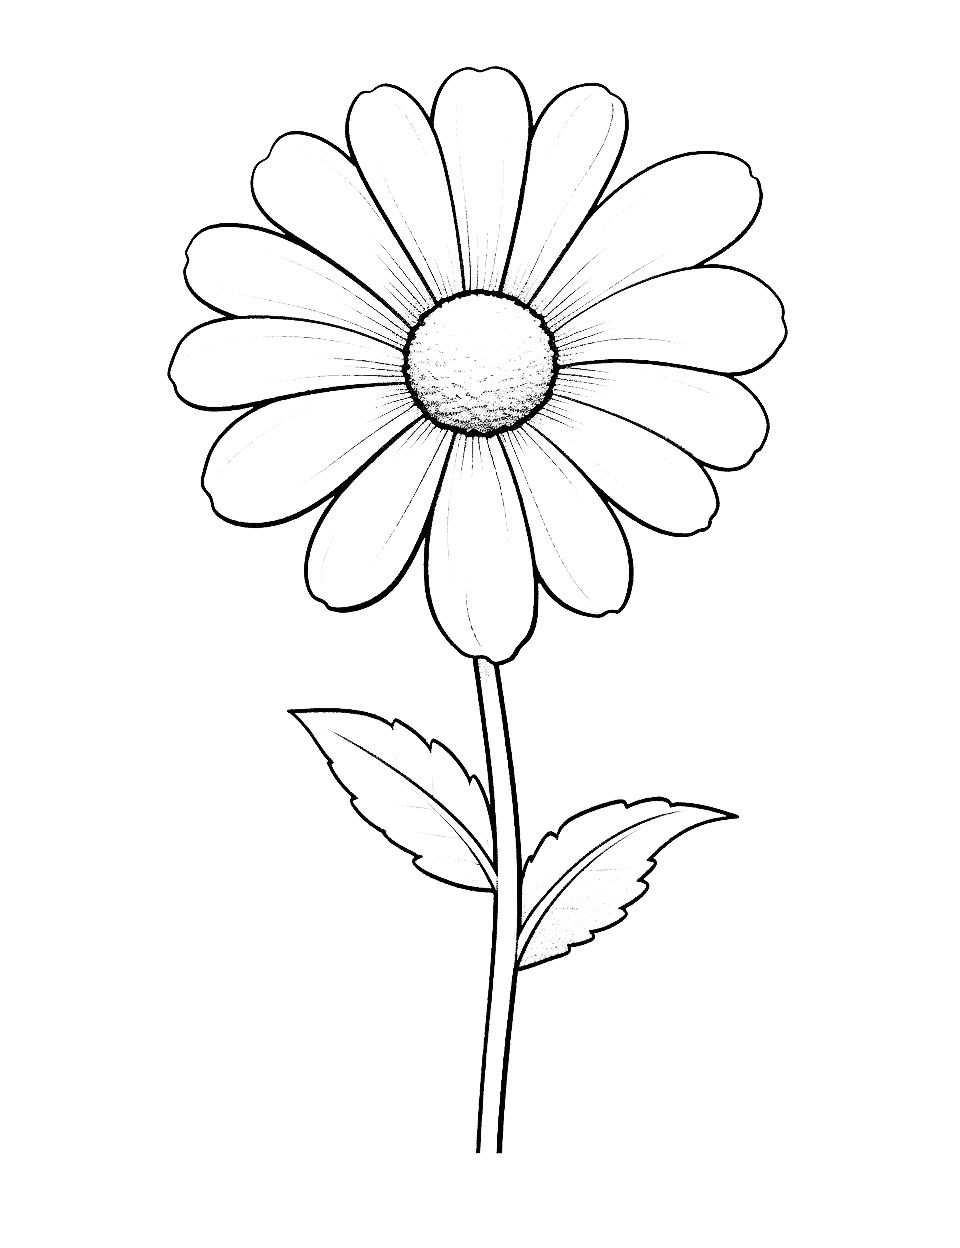 Large and Easy Daisy Flower Coloring Page - A large, easy-to-color daisy, perfect for young kids.